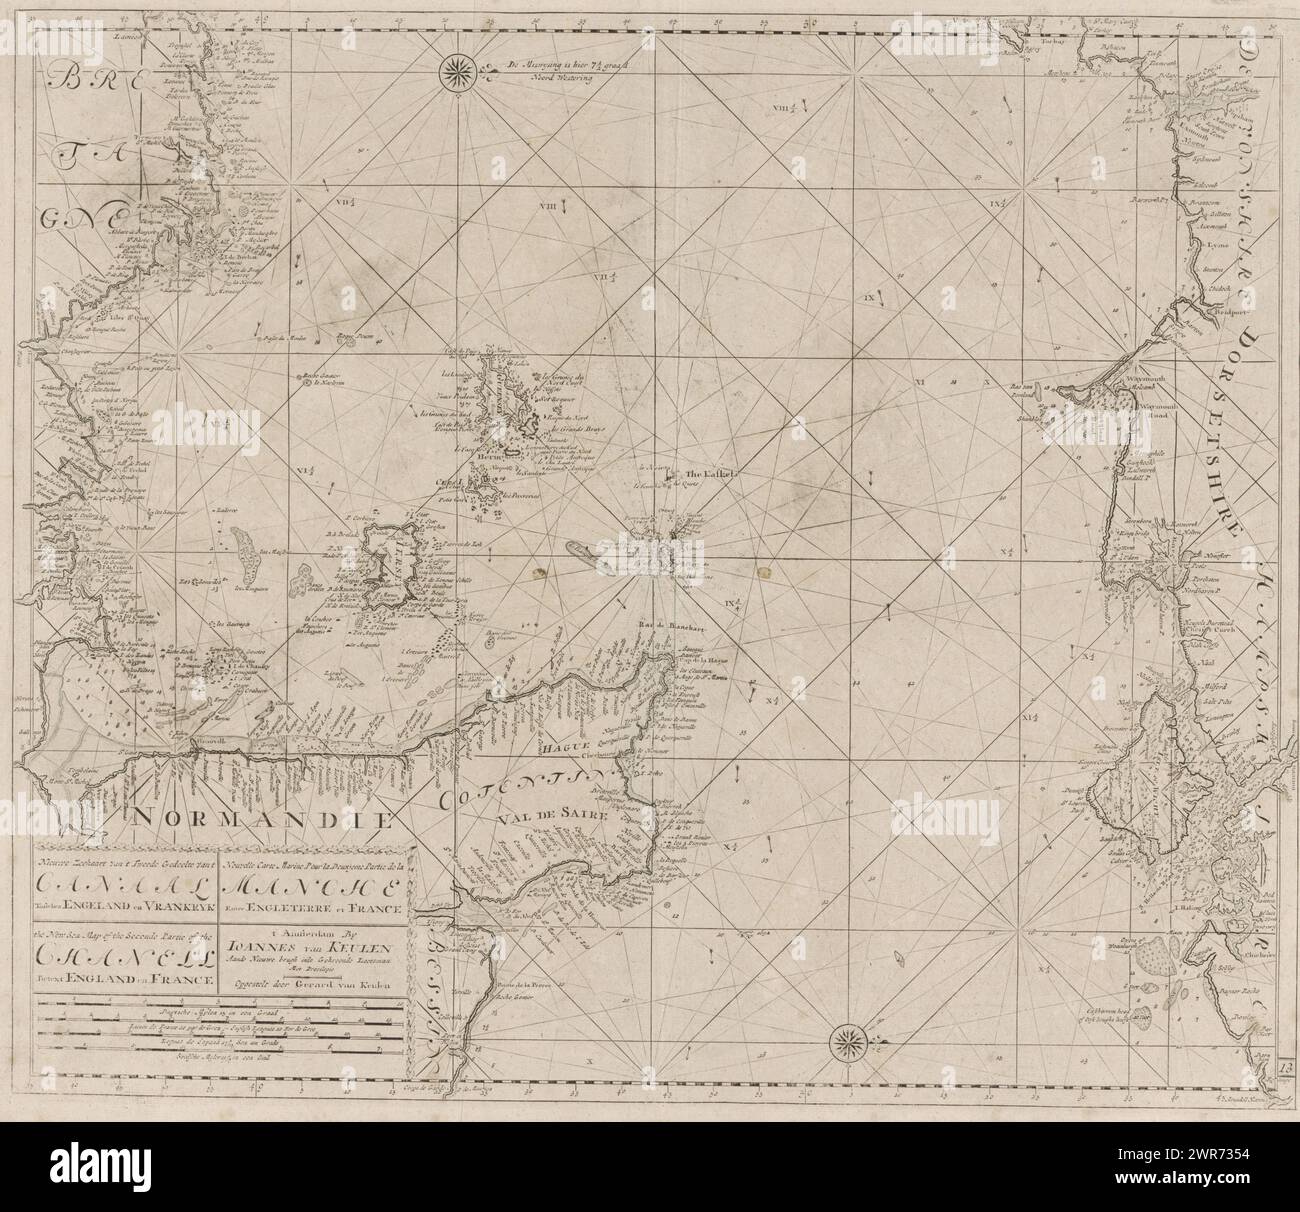 Pass map of the Channel between England and France, part 2, New Nautical Chart of the Second Part of the Canal Between England and France (title on object), Pass map of a part of the Channel, the strait between Great Britain and France, with two compass roses. Bottom left a cartouche with the title, the address of the publisher and the scale., print maker: anonymous, after design by: Gerard van Keulen, publisher: Johannes van Keulen (I), Amsterdam, 1688 - 1803, paper, engraving, etching, height 523 mm × width 620 mm, print Stock Photo